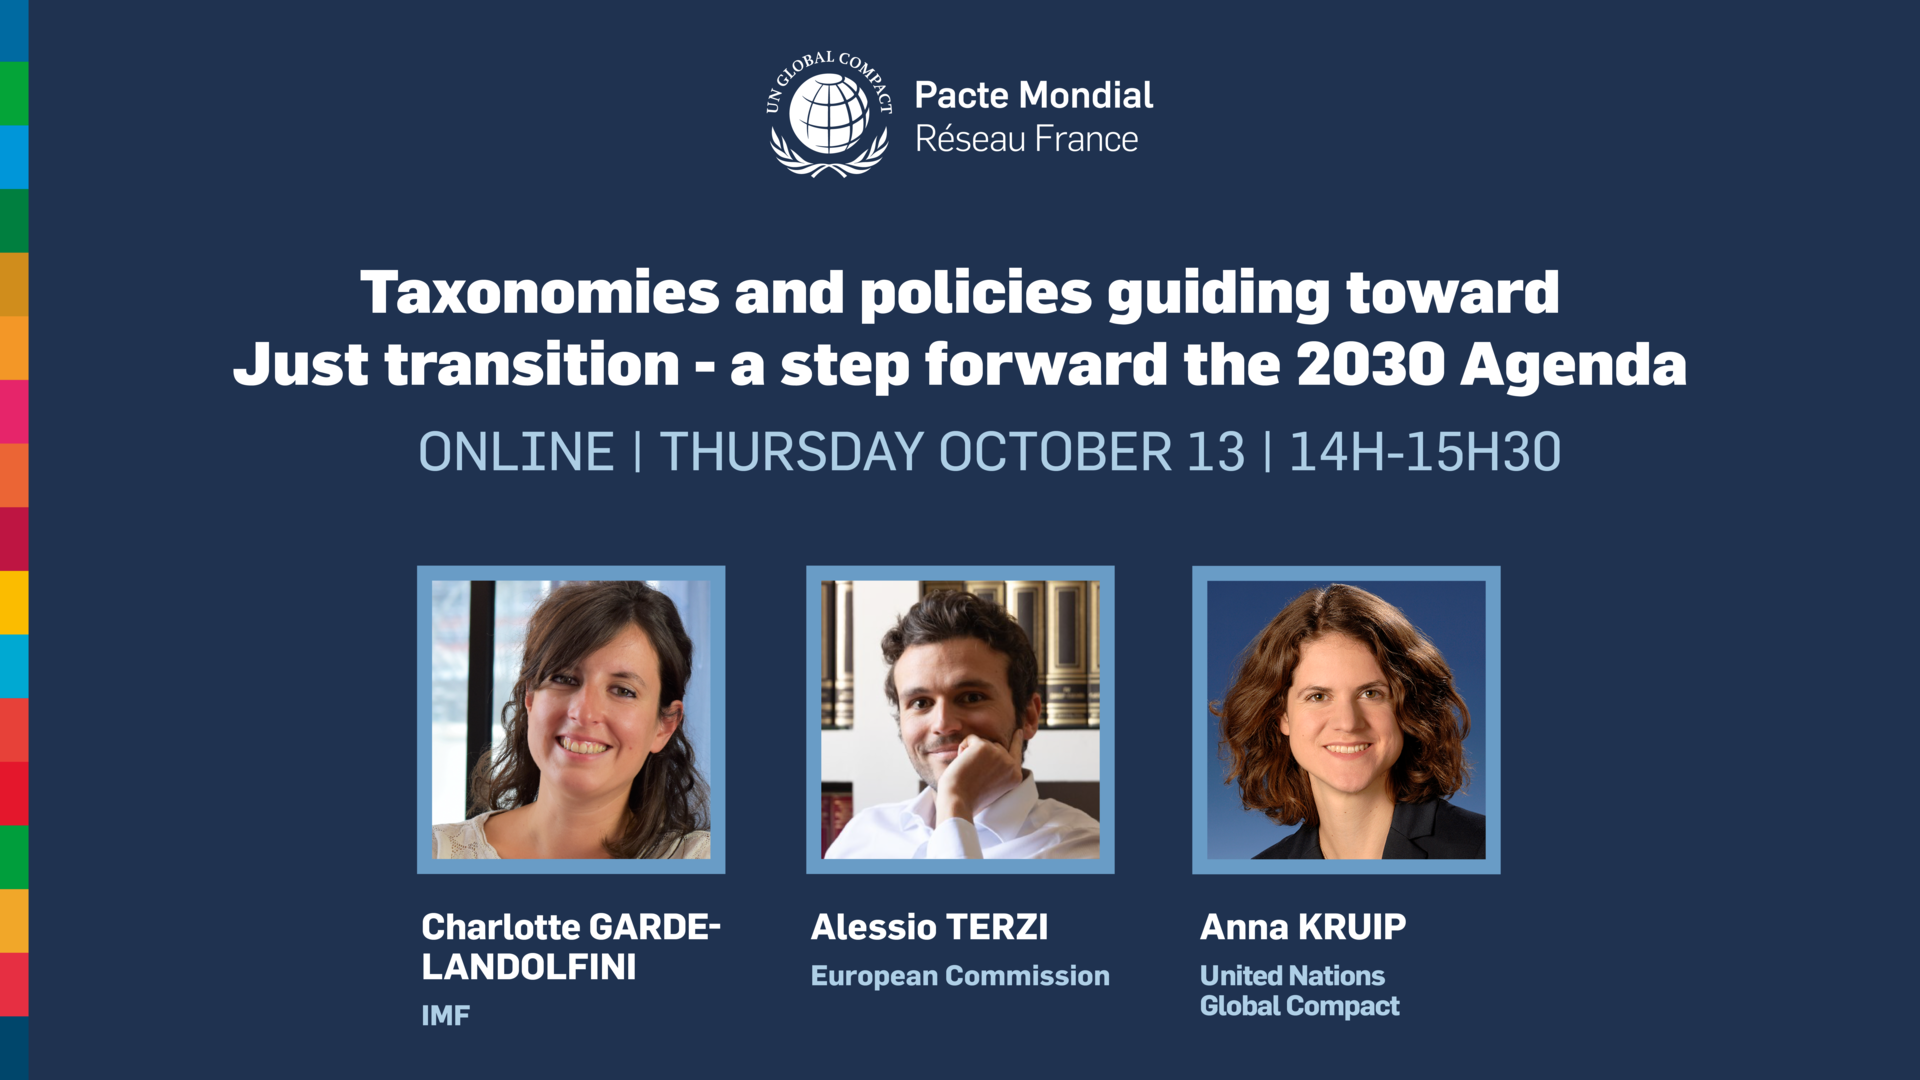 Join to discover how European taxonomies and policies will drive business transformation at the global level.